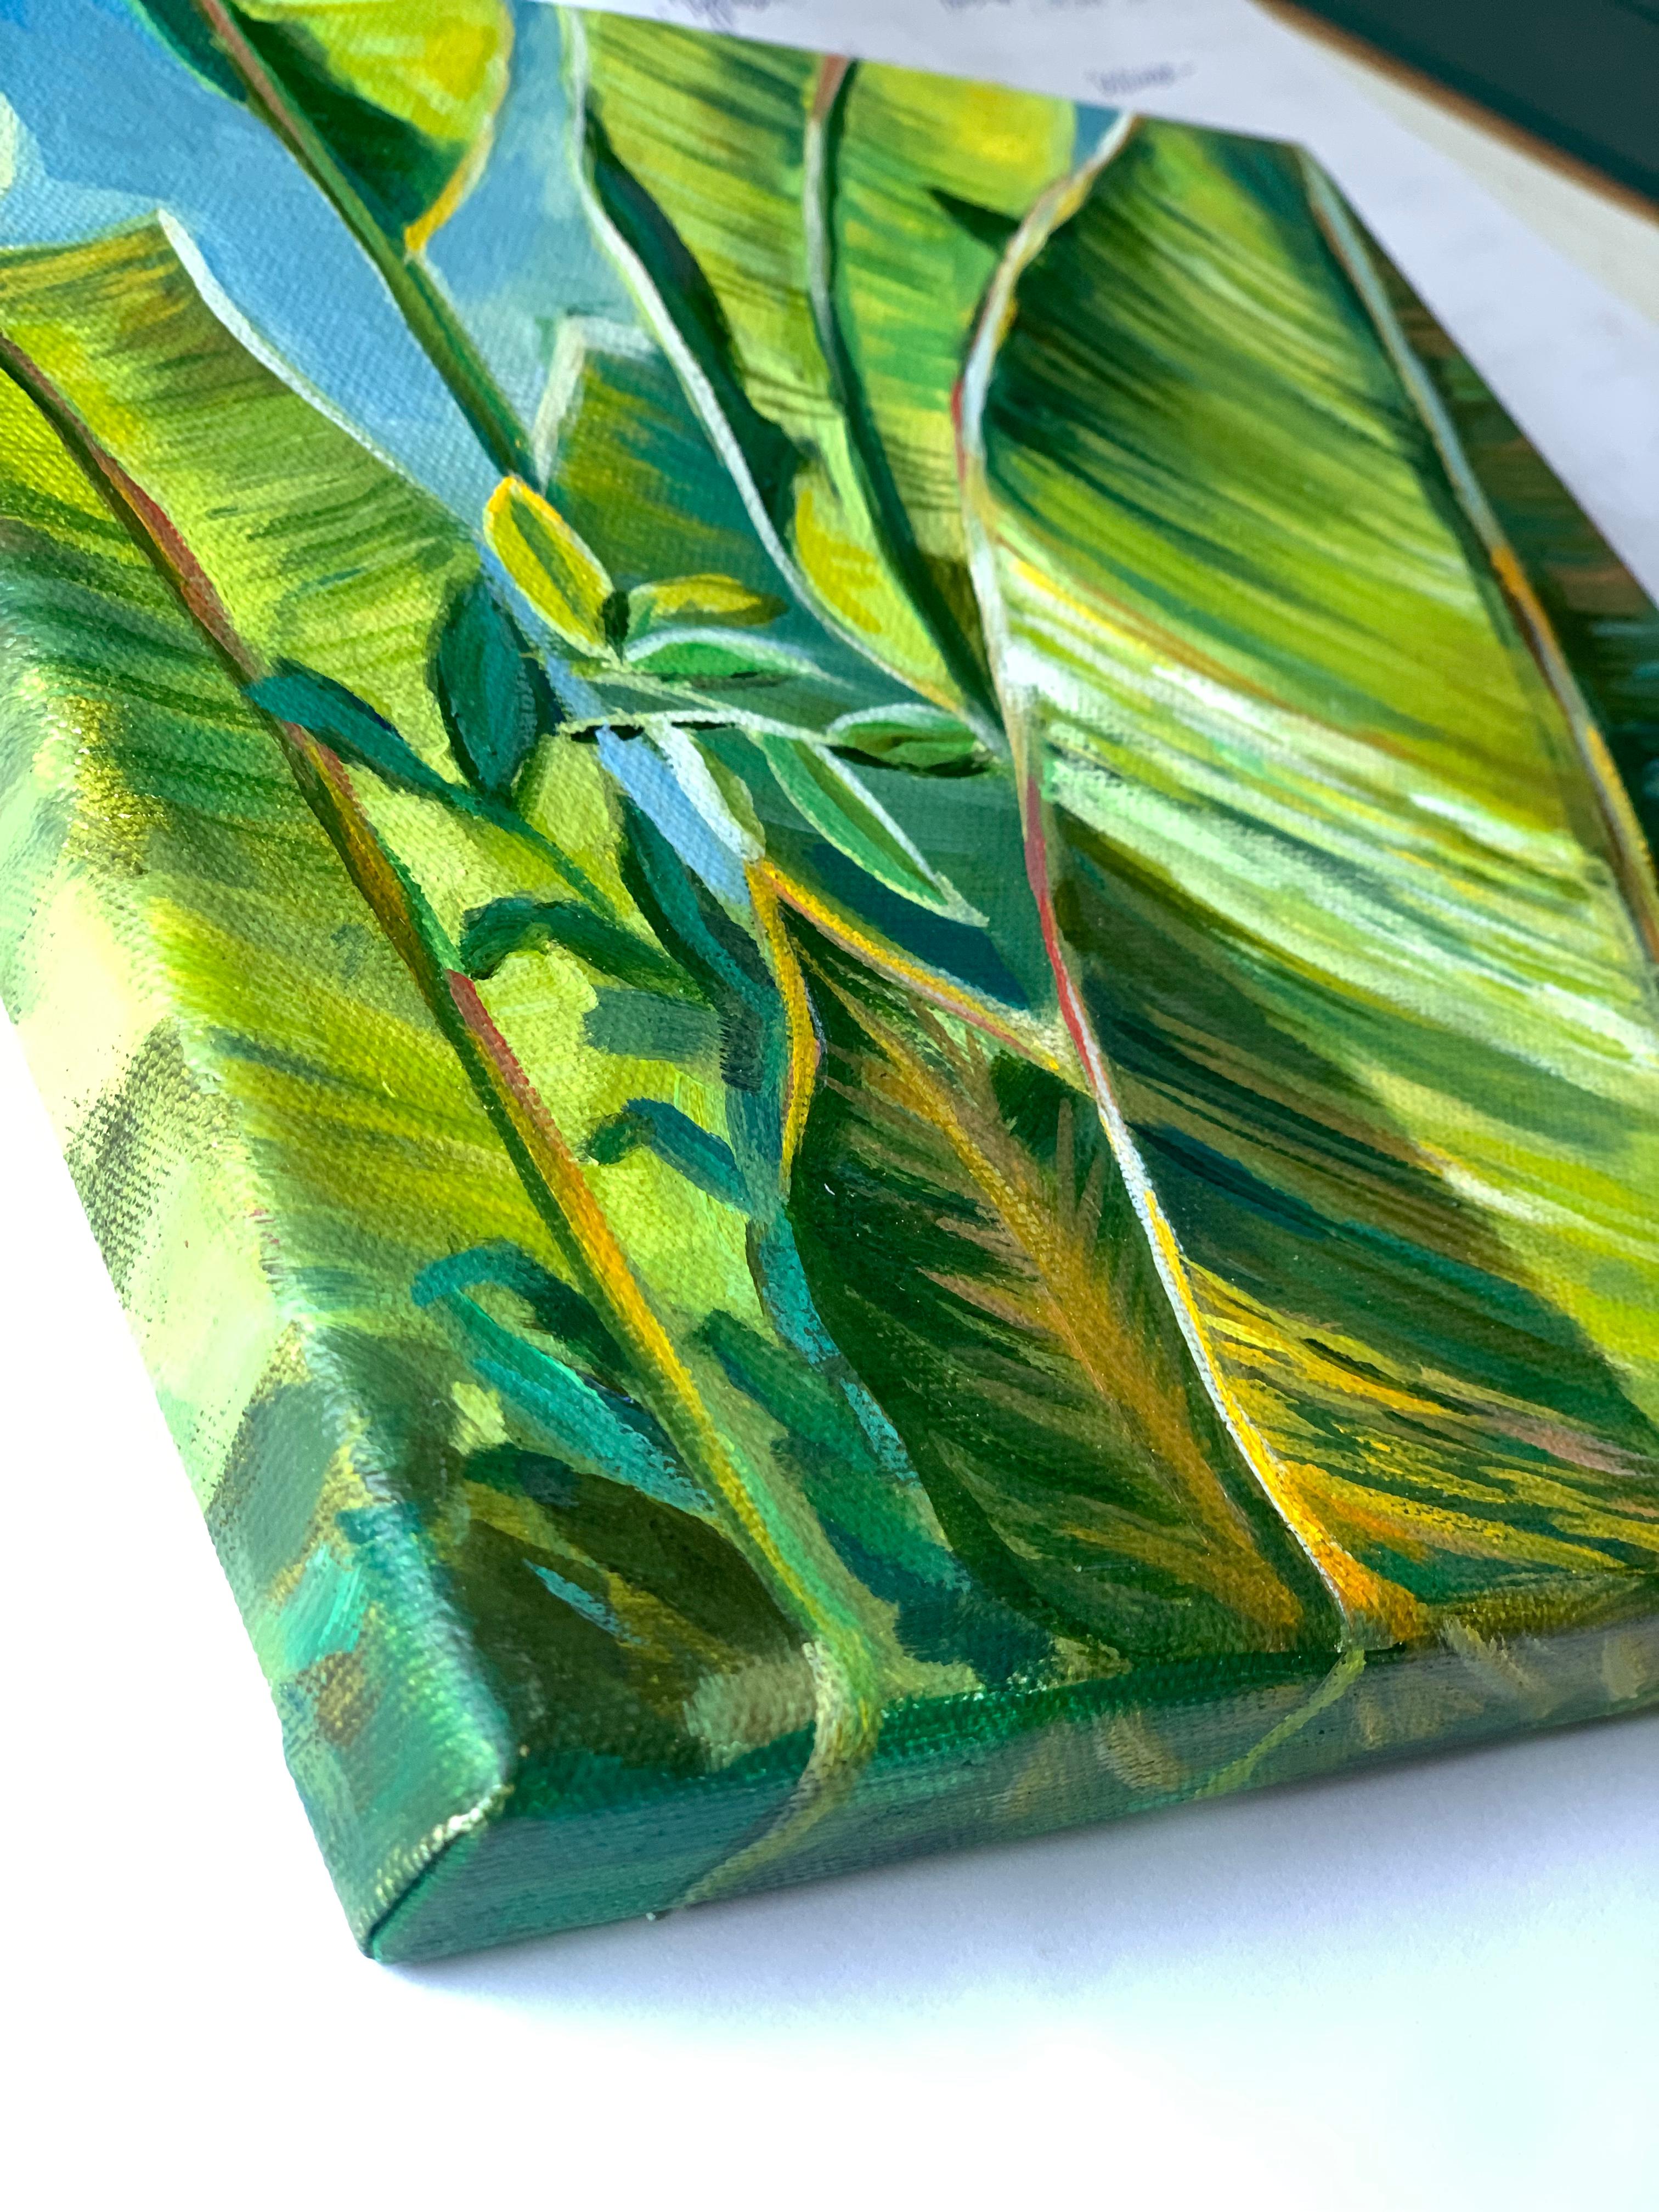 Original small oil painting on canvas . green leaf of Palm
Watching the sunlit leaves gives us a burst of energy and positive feelings, don't you agree?
- Original oil painting on canvas - miniature 
- 20x20 cm (7.8 x 7.8 inch)
- 0.6 inch thick